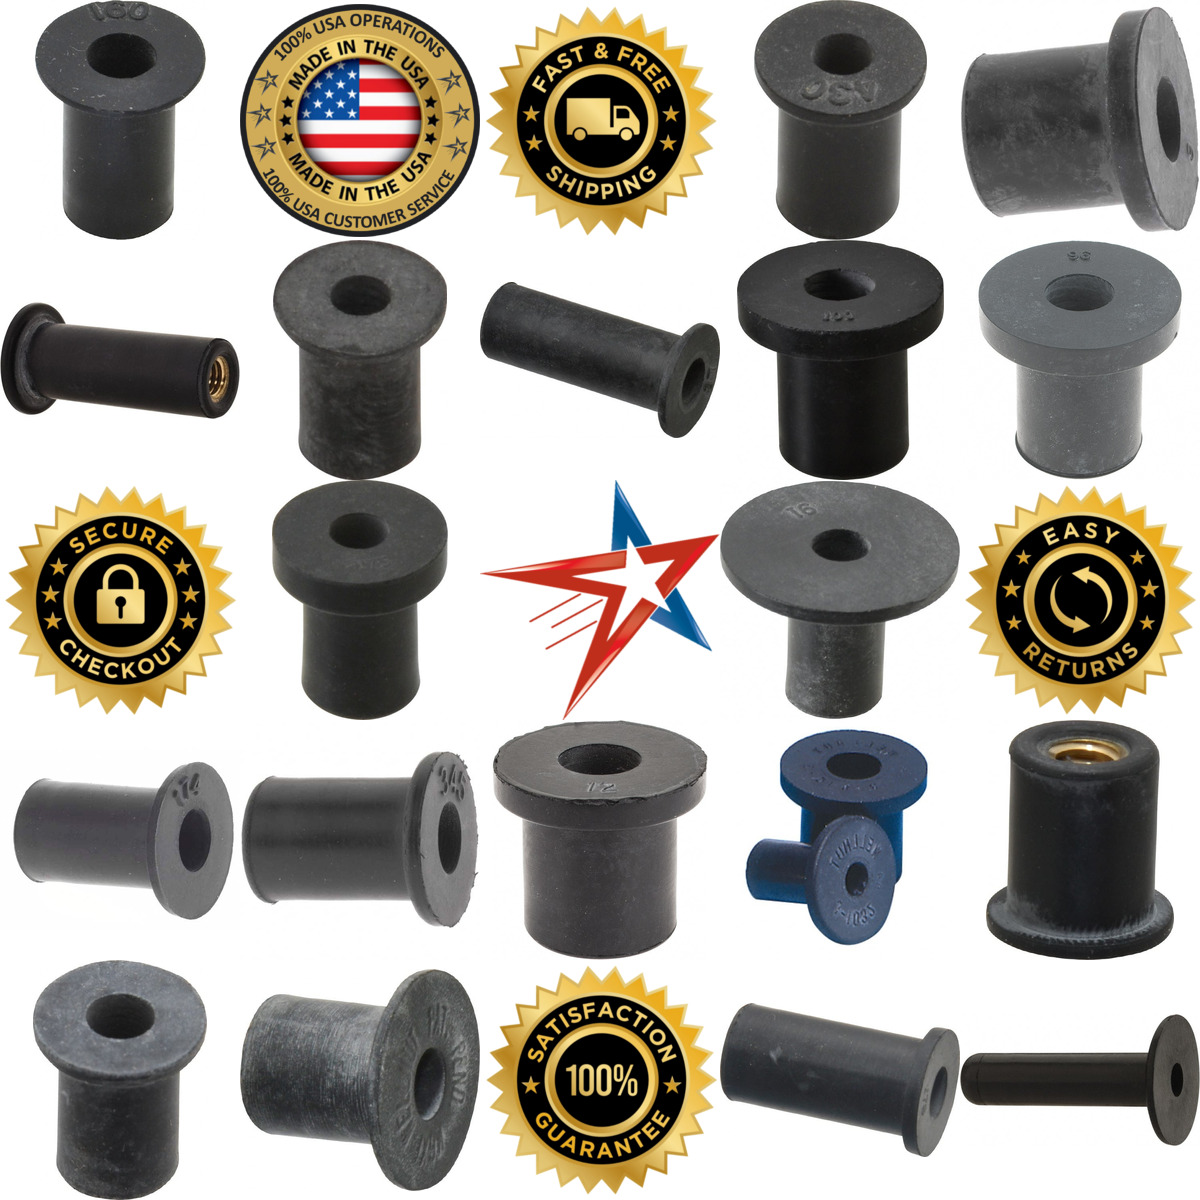 A selection of Rubber Insulated Rivet Nuts products on GoVets